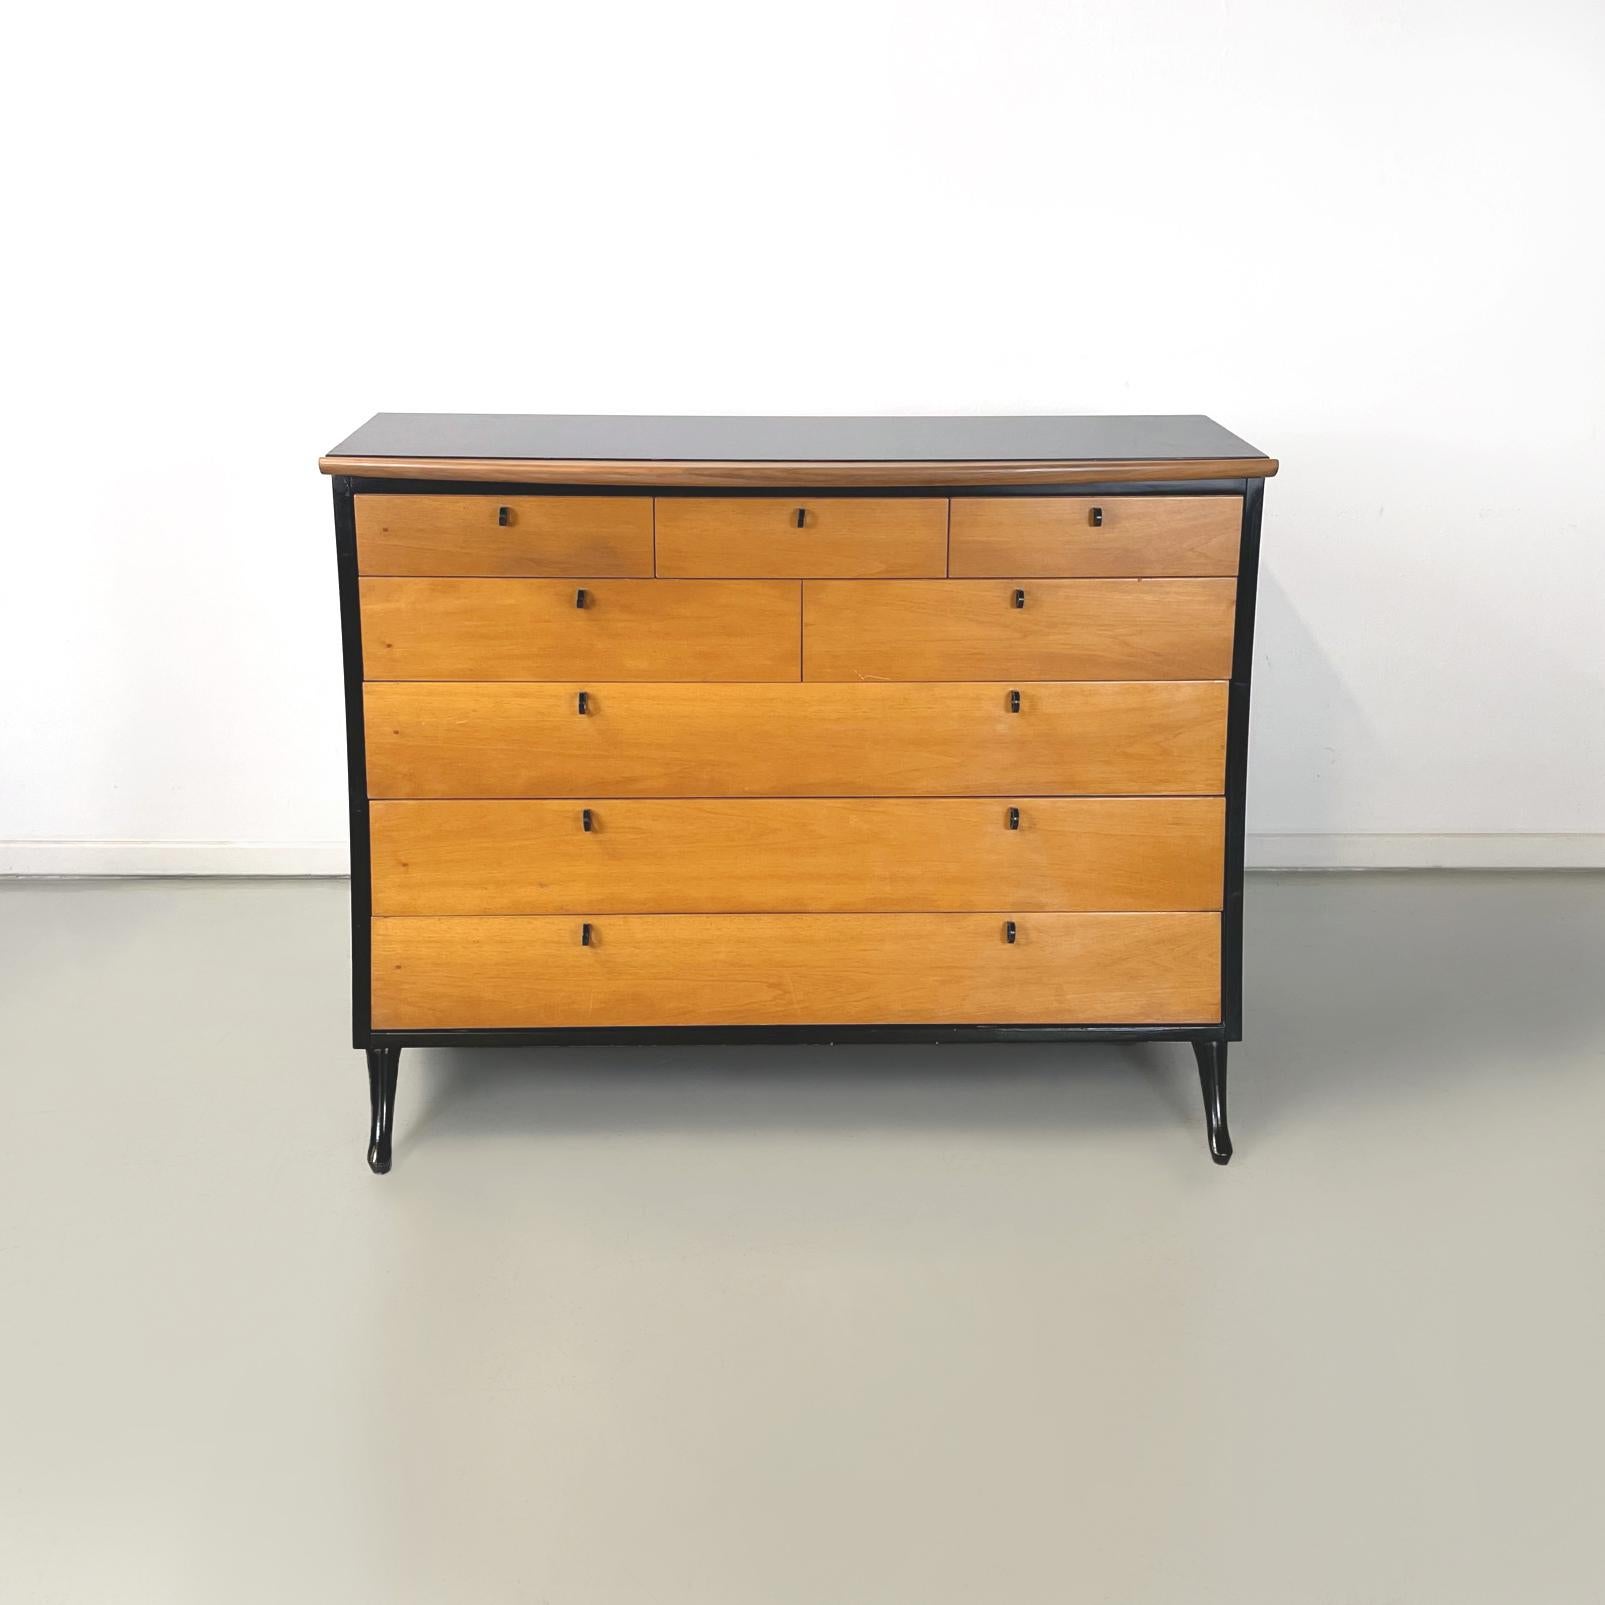 Italian modern black wood Chest of drawers by Umberto Asnago for Giorgetti, 1980s
Cantilever chest of drawers with curved profile and structure in light solid wood and black painted wood. On the front it has 8 drawers of different sizes with ring